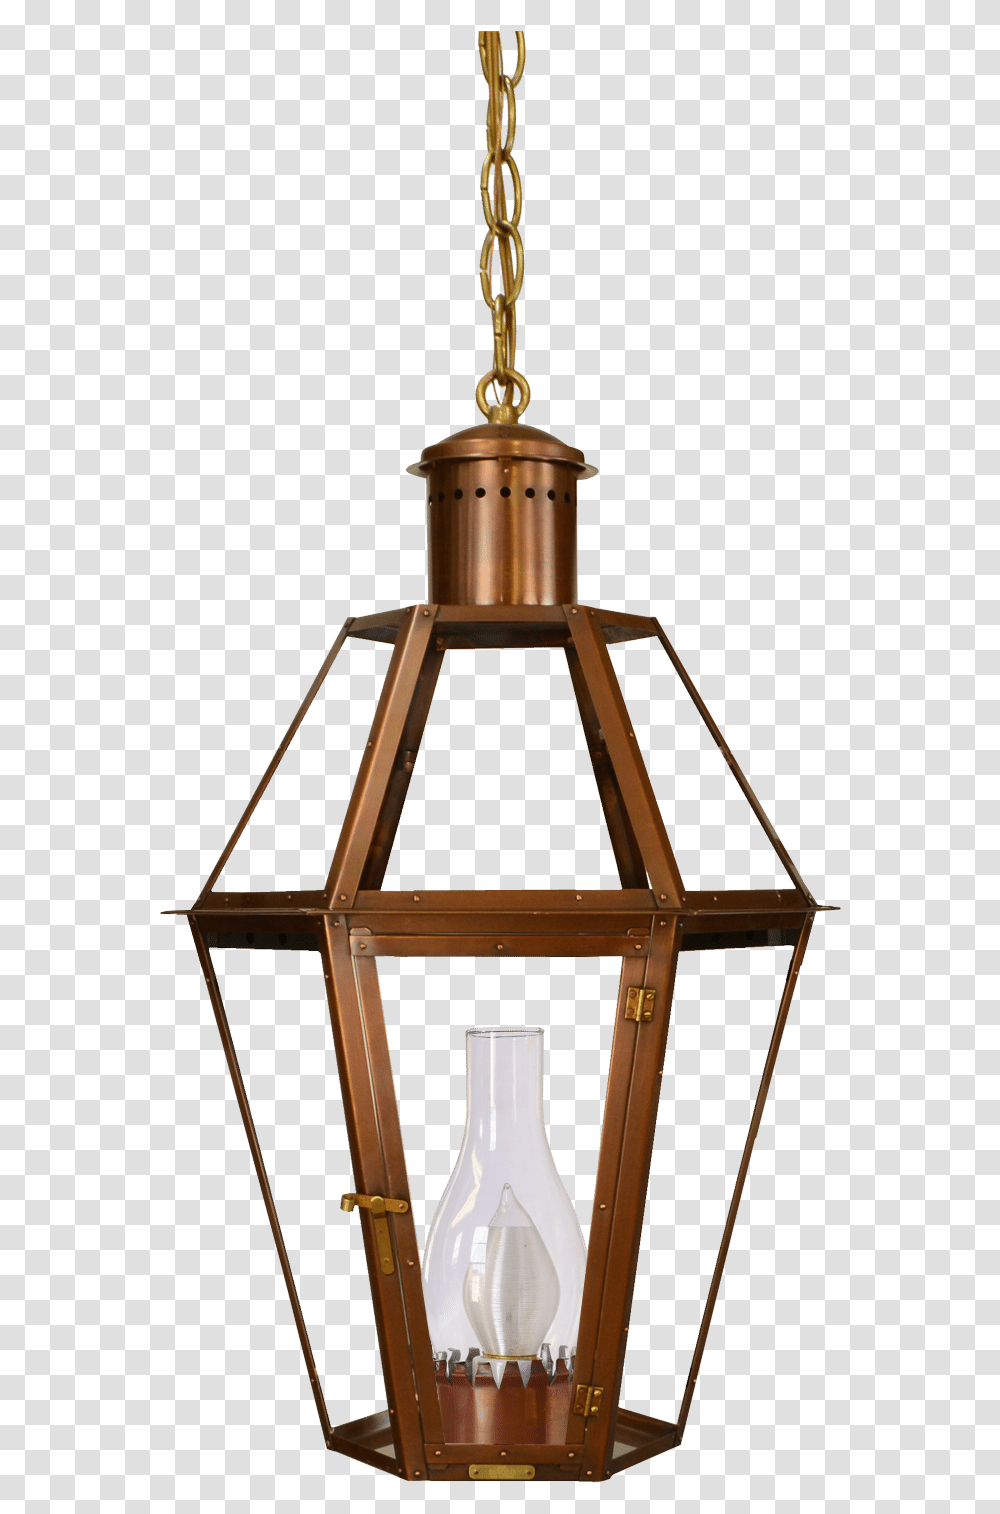 Six Sided Hanging Chain Or Stem Fixture, Lighting, Lamp, Lantern Transparent Png